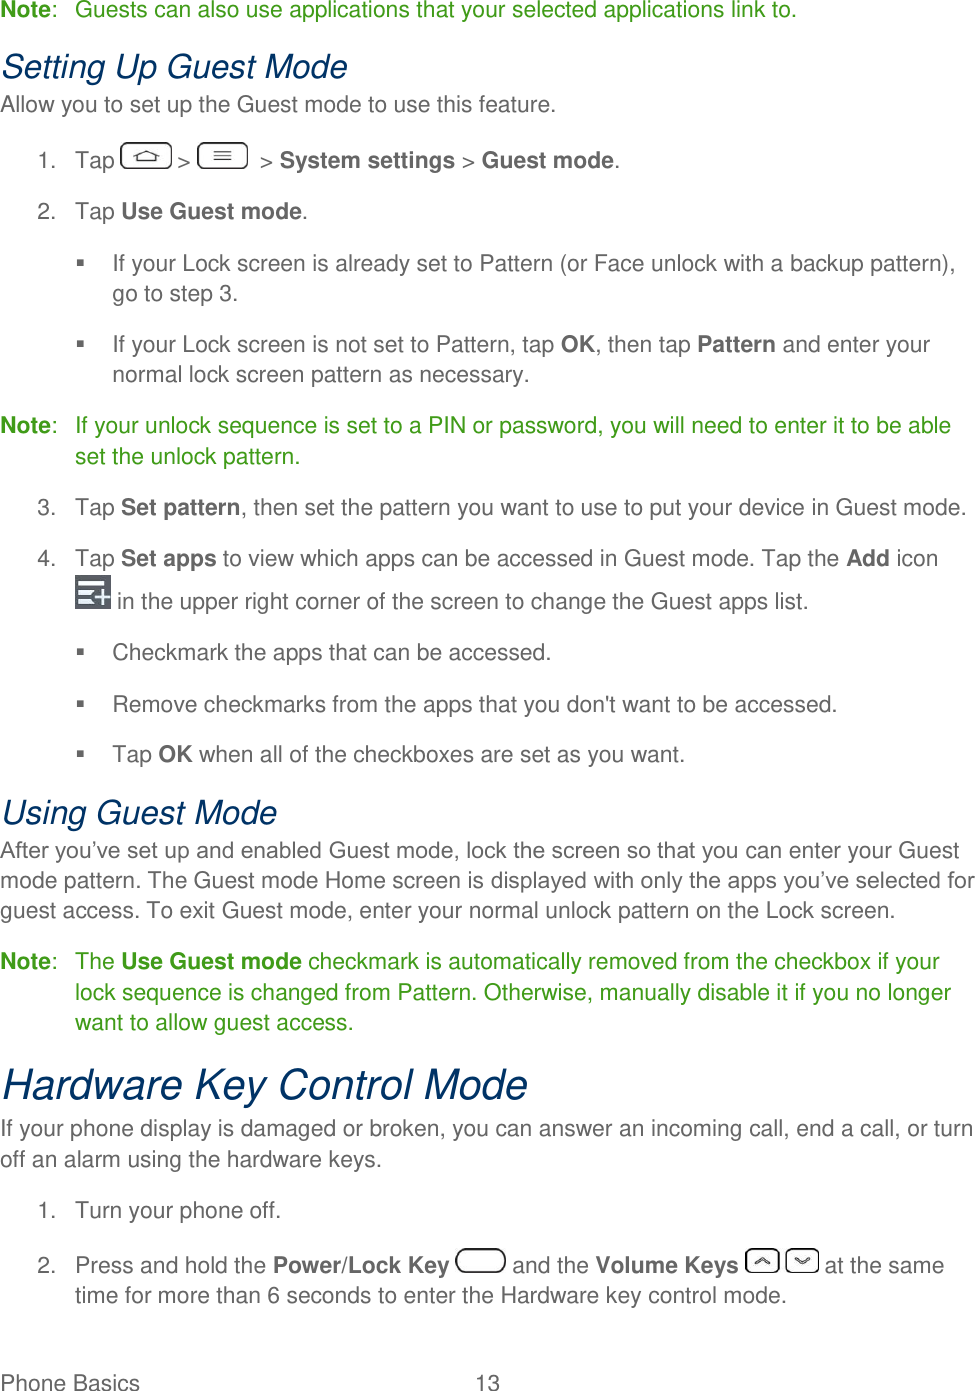  Phone Basics  13   Note:  Guests can also use applications that your selected applications link to. Setting Up Guest Mode Allow you to set up the Guest mode to use this feature. 1.  Tap   &gt;    &gt; System settings &gt; Guest mode. 2.  Tap Use Guest mode.   If your Lock screen is already set to Pattern (or Face unlock with a backup pattern), go to step 3.   If your Lock screen is not set to Pattern, tap OK, then tap Pattern and enter your normal lock screen pattern as necessary. Note:  If your unlock sequence is set to a PIN or password, you will need to enter it to be able set the unlock pattern. 3.  Tap Set pattern, then set the pattern you want to use to put your device in Guest mode. 4.  Tap Set apps to view which apps can be accessed in Guest mode. Tap the Add icon  in the upper right corner of the screen to change the Guest apps list.   Checkmark the apps that can be accessed.   Remove checkmarks from the apps that you don&apos;t want to be accessed.   Tap OK when all of the checkboxes are set as you want. Using Guest Mode After you‘ve set up and enabled Guest mode, lock the screen so that you can enter your Guest mode pattern. The Guest mode Home screen is displayed with only the apps you‘ve selected for guest access. To exit Guest mode, enter your normal unlock pattern on the Lock screen. Note:  The Use Guest mode checkmark is automatically removed from the checkbox if your lock sequence is changed from Pattern. Otherwise, manually disable it if you no longer want to allow guest access. Hardware Key Control Mode If your phone display is damaged or broken, you can answer an incoming call, end a call, or turn off an alarm using the hardware keys. 1.  Turn your phone off. 2.  Press and hold the Power/Lock Key   and the Volume Keys   at the same time for more than 6 seconds to enter the Hardware key control mode. 